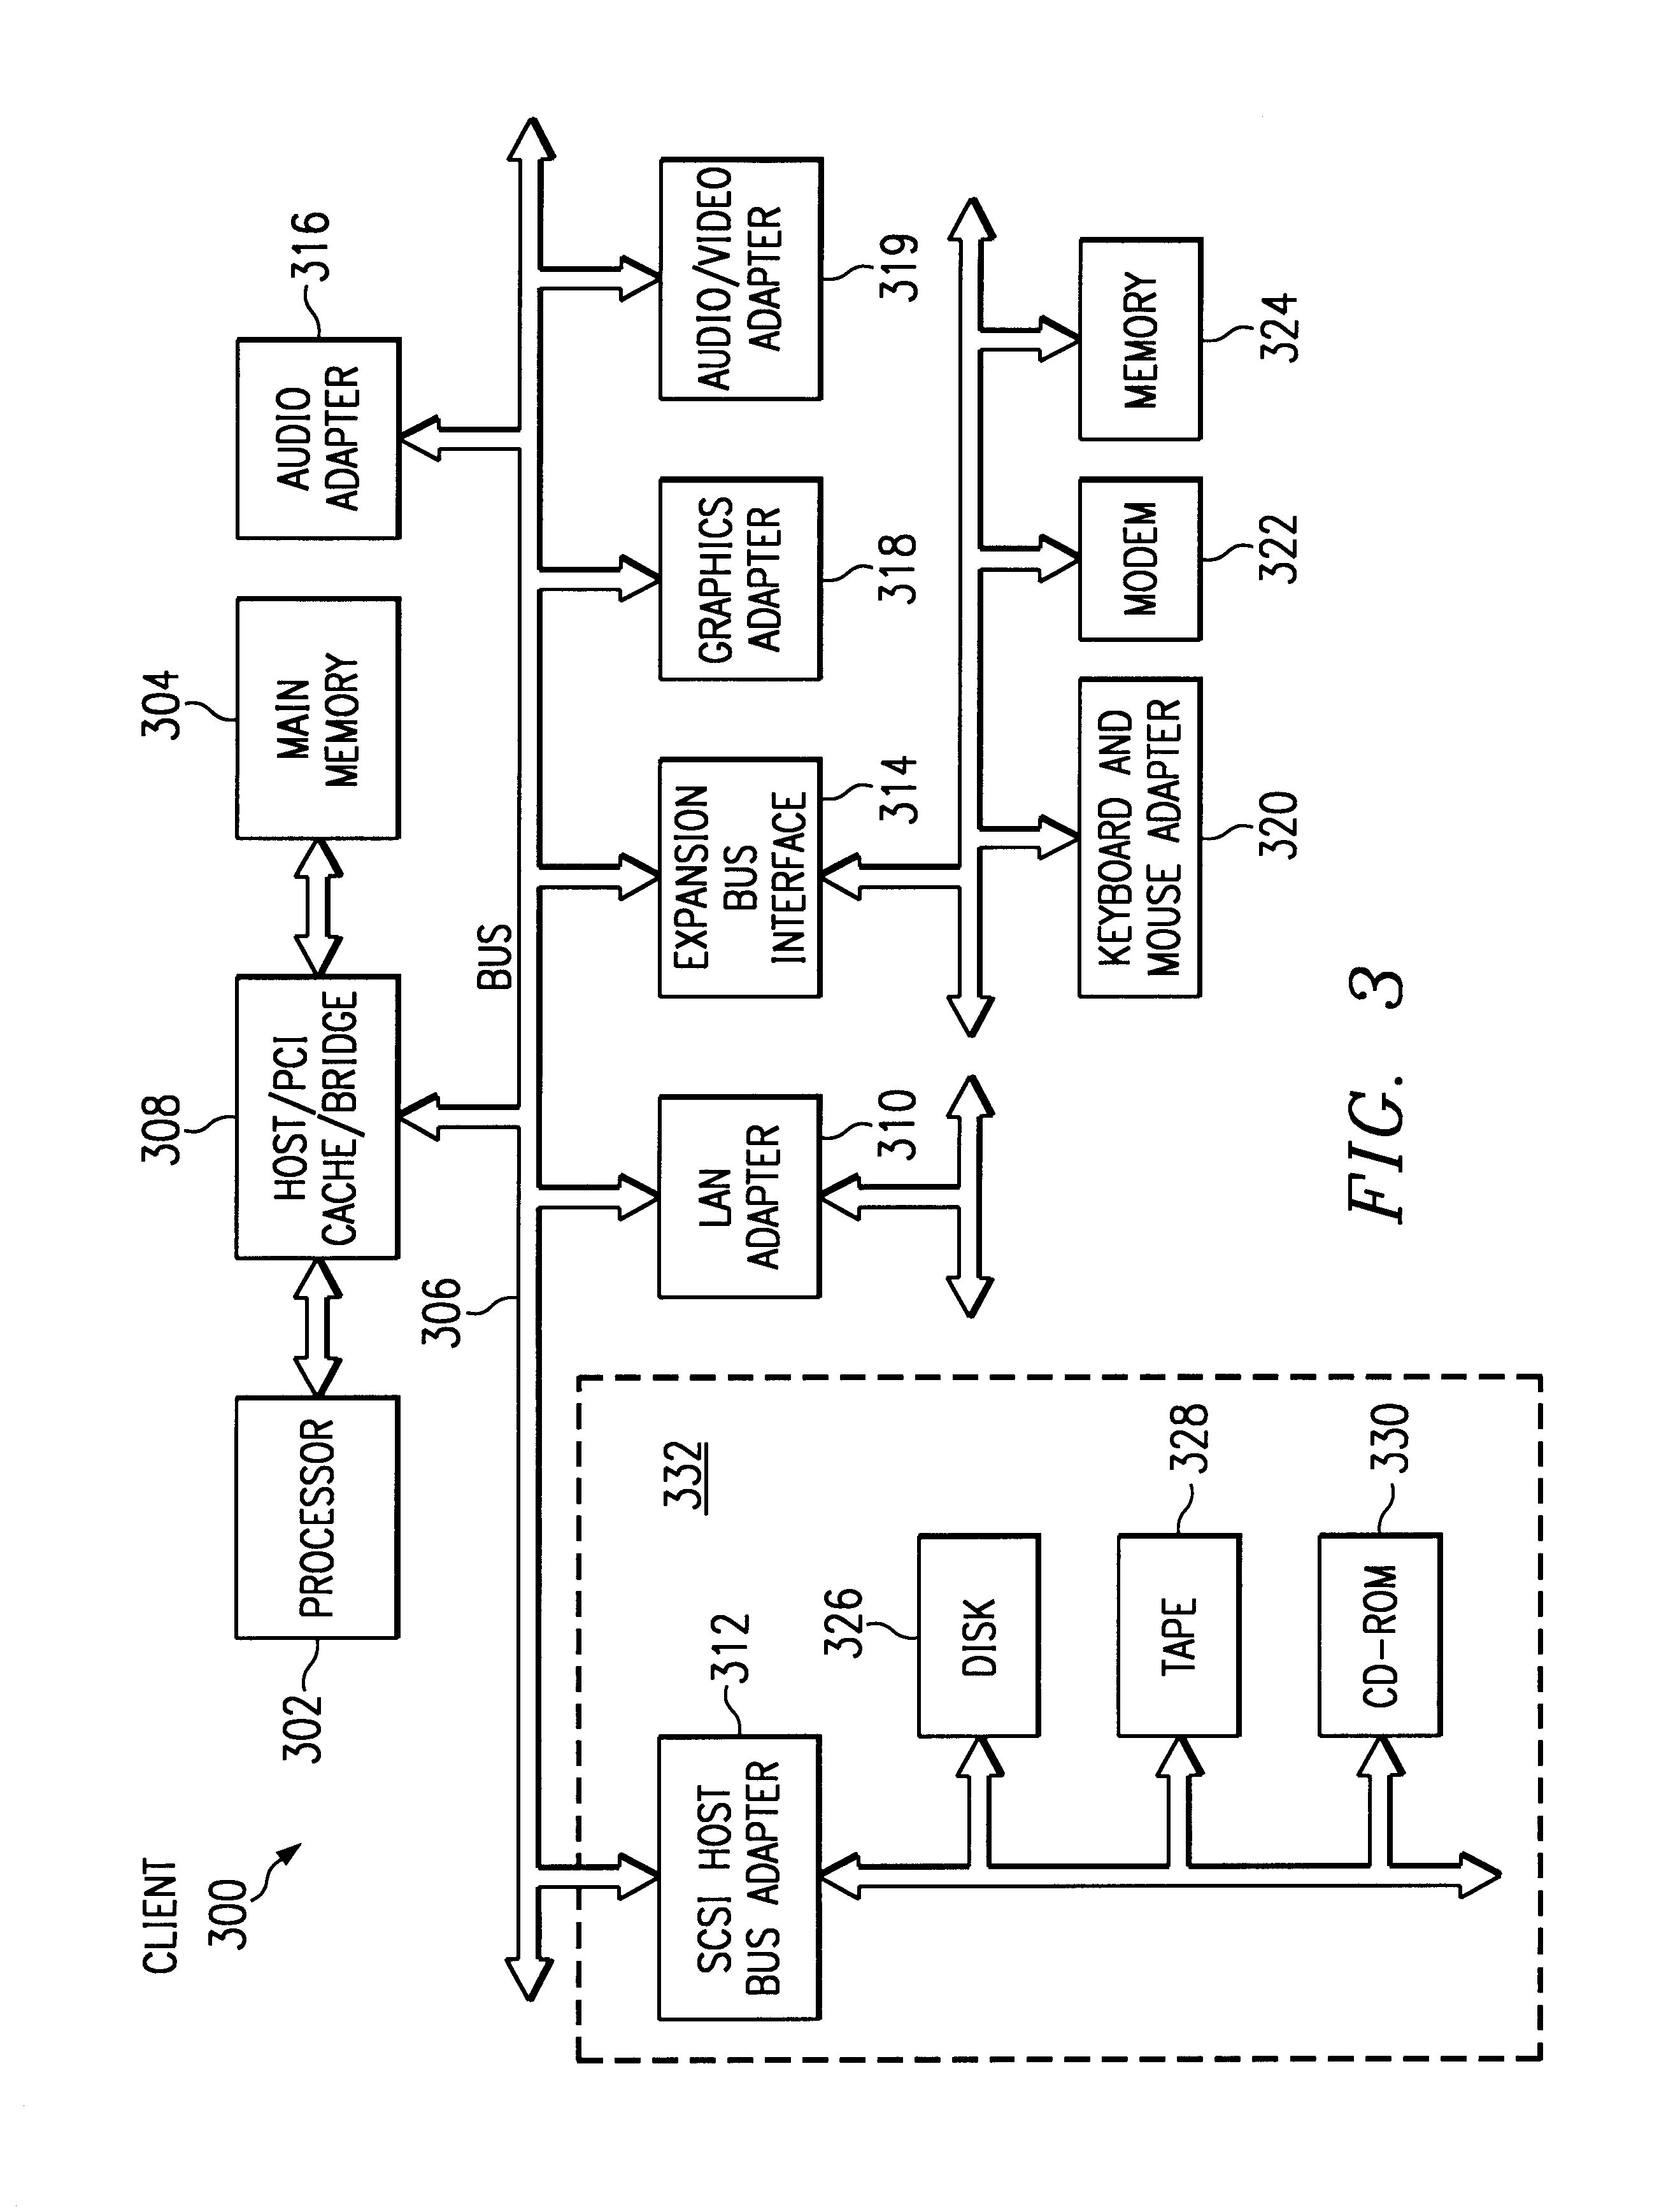 Method and apparatus for dynamic distribution of system file and system registry changes in a distributed data processing system